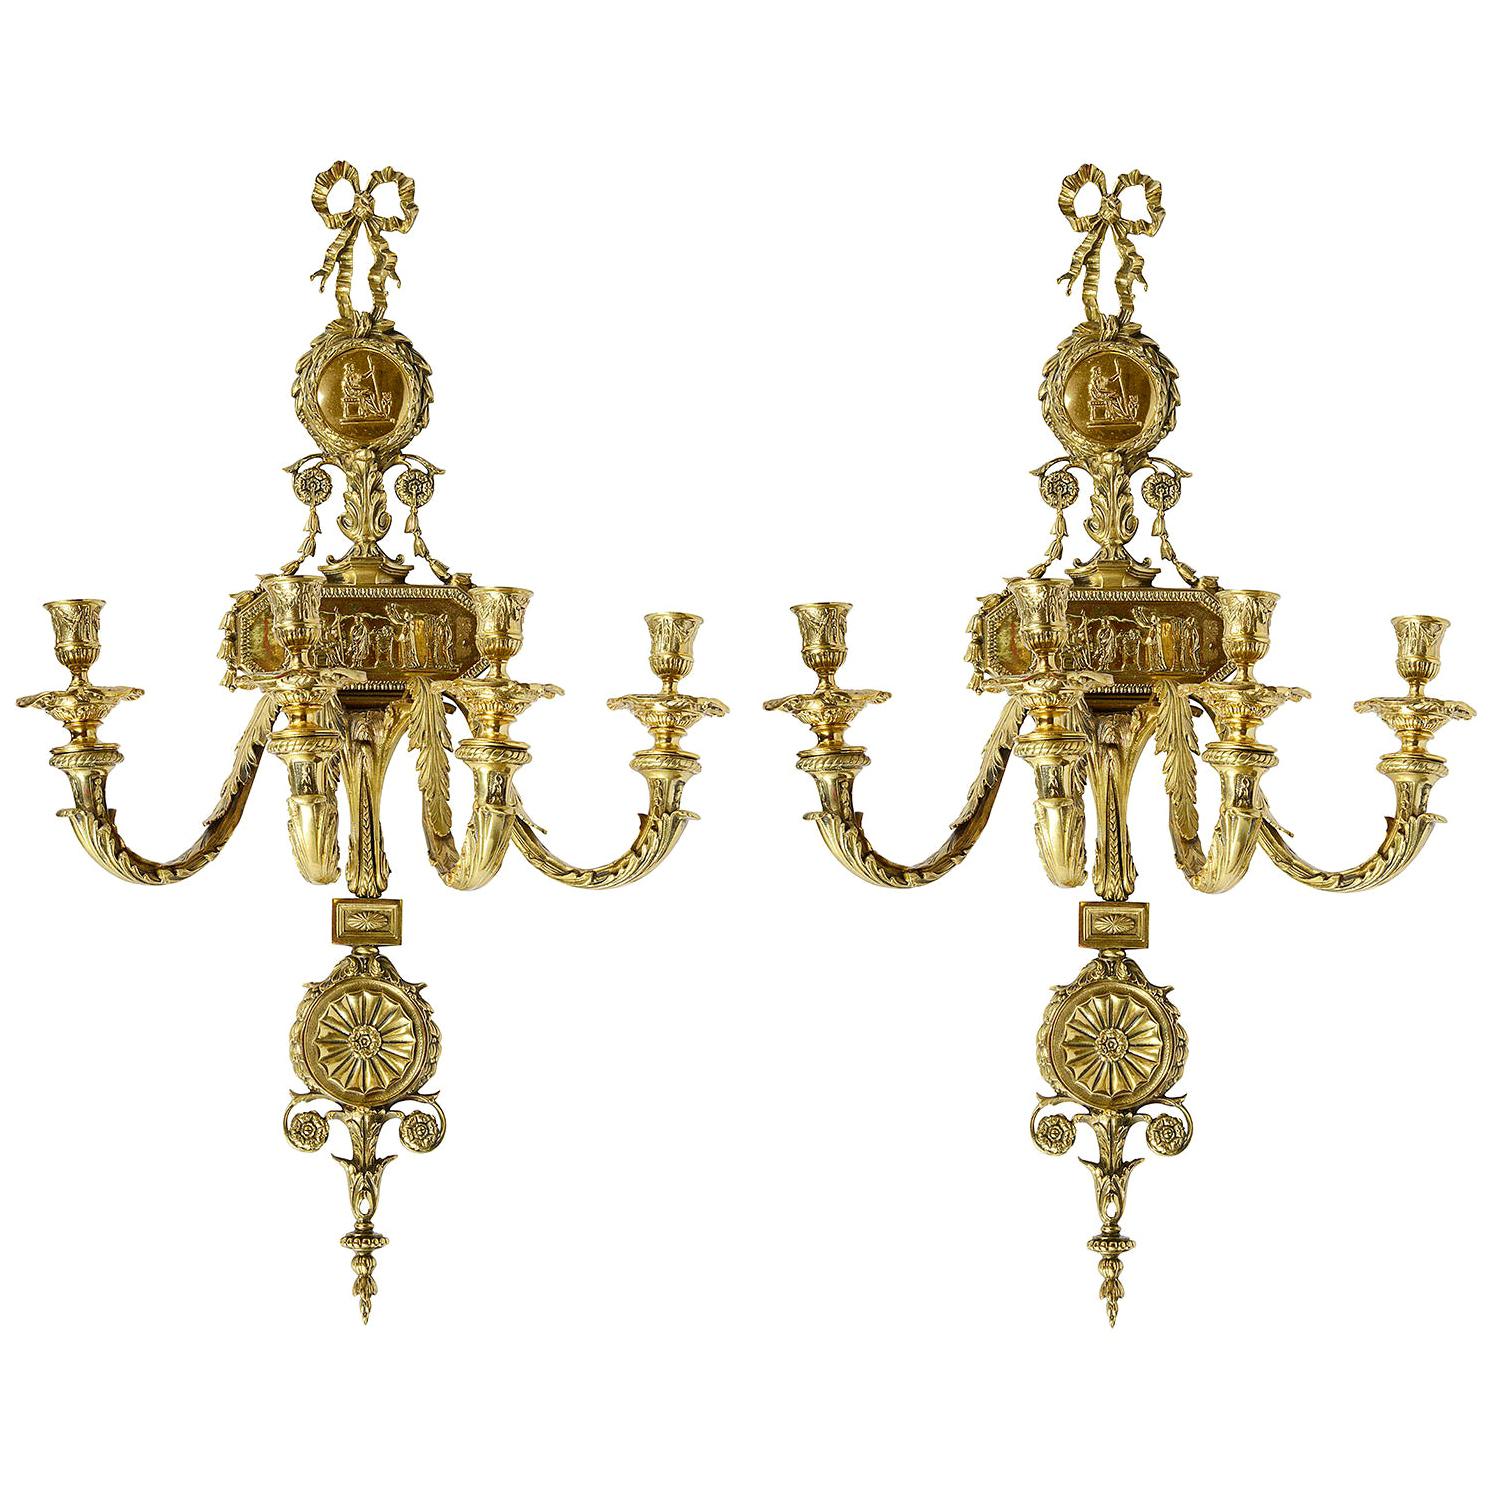 Pair of Neoclassical Adam Style Wall Lights, 19th Century